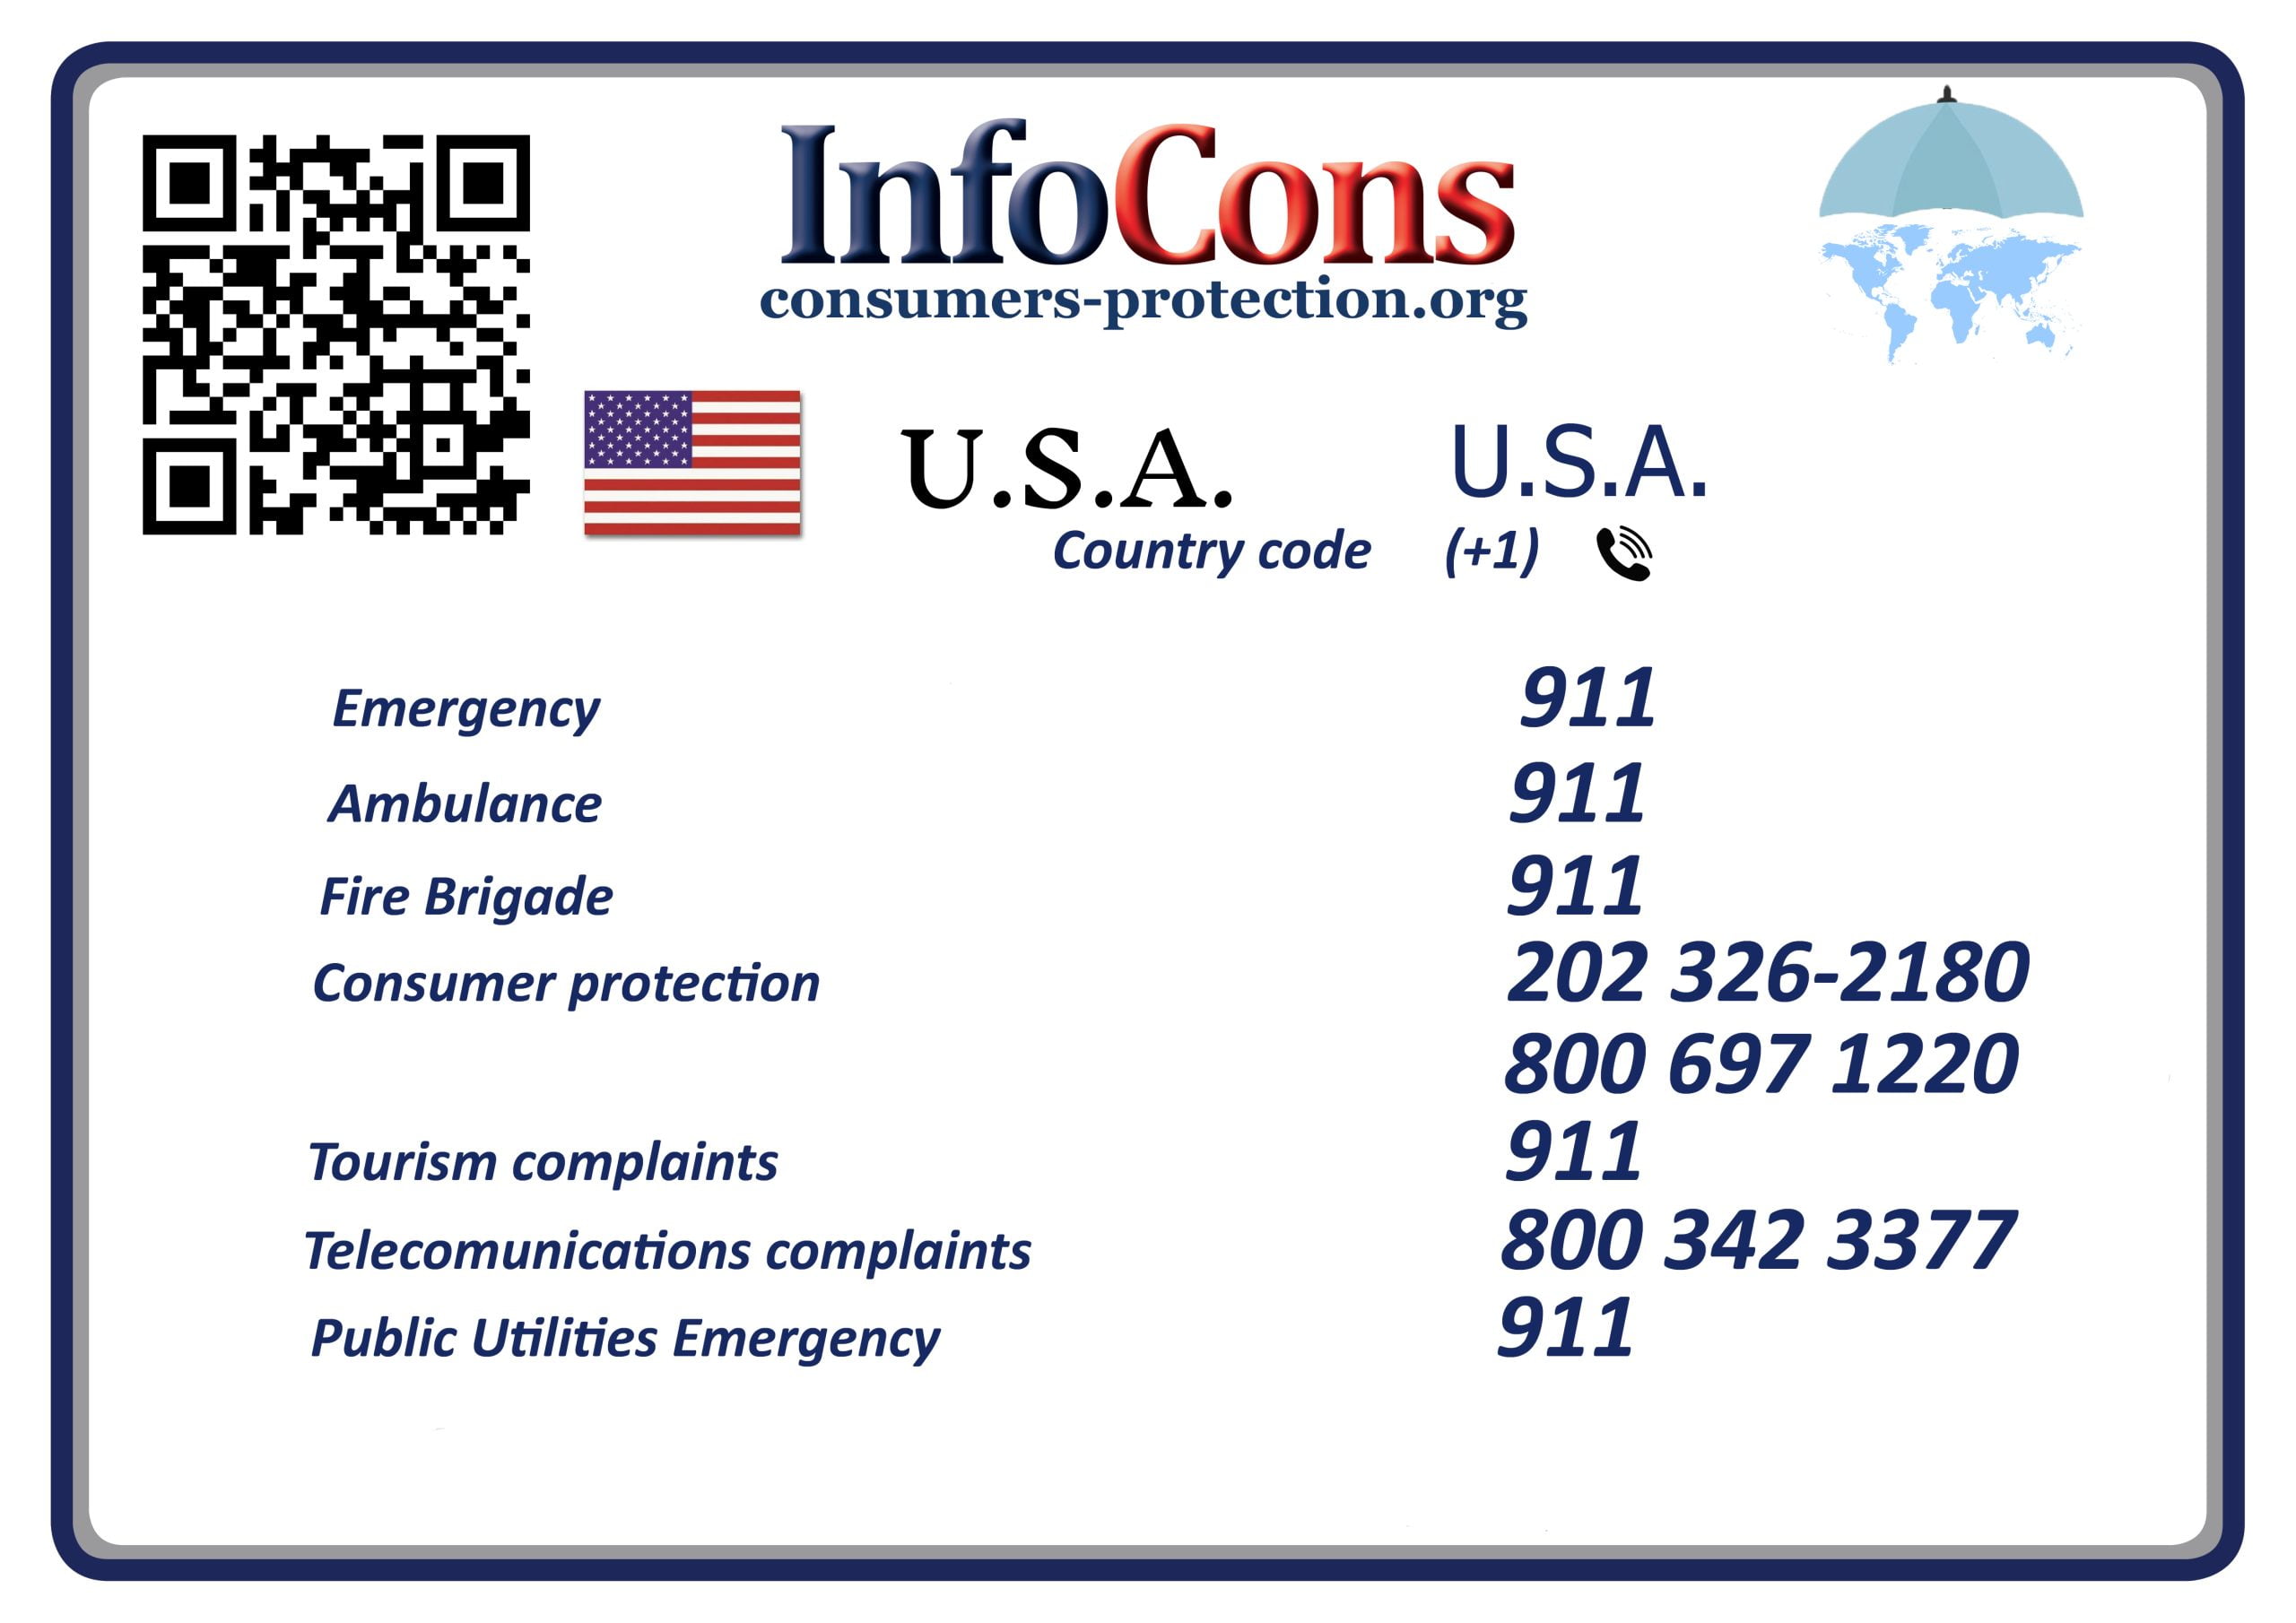 Consumers Protection Consumer Protection USA